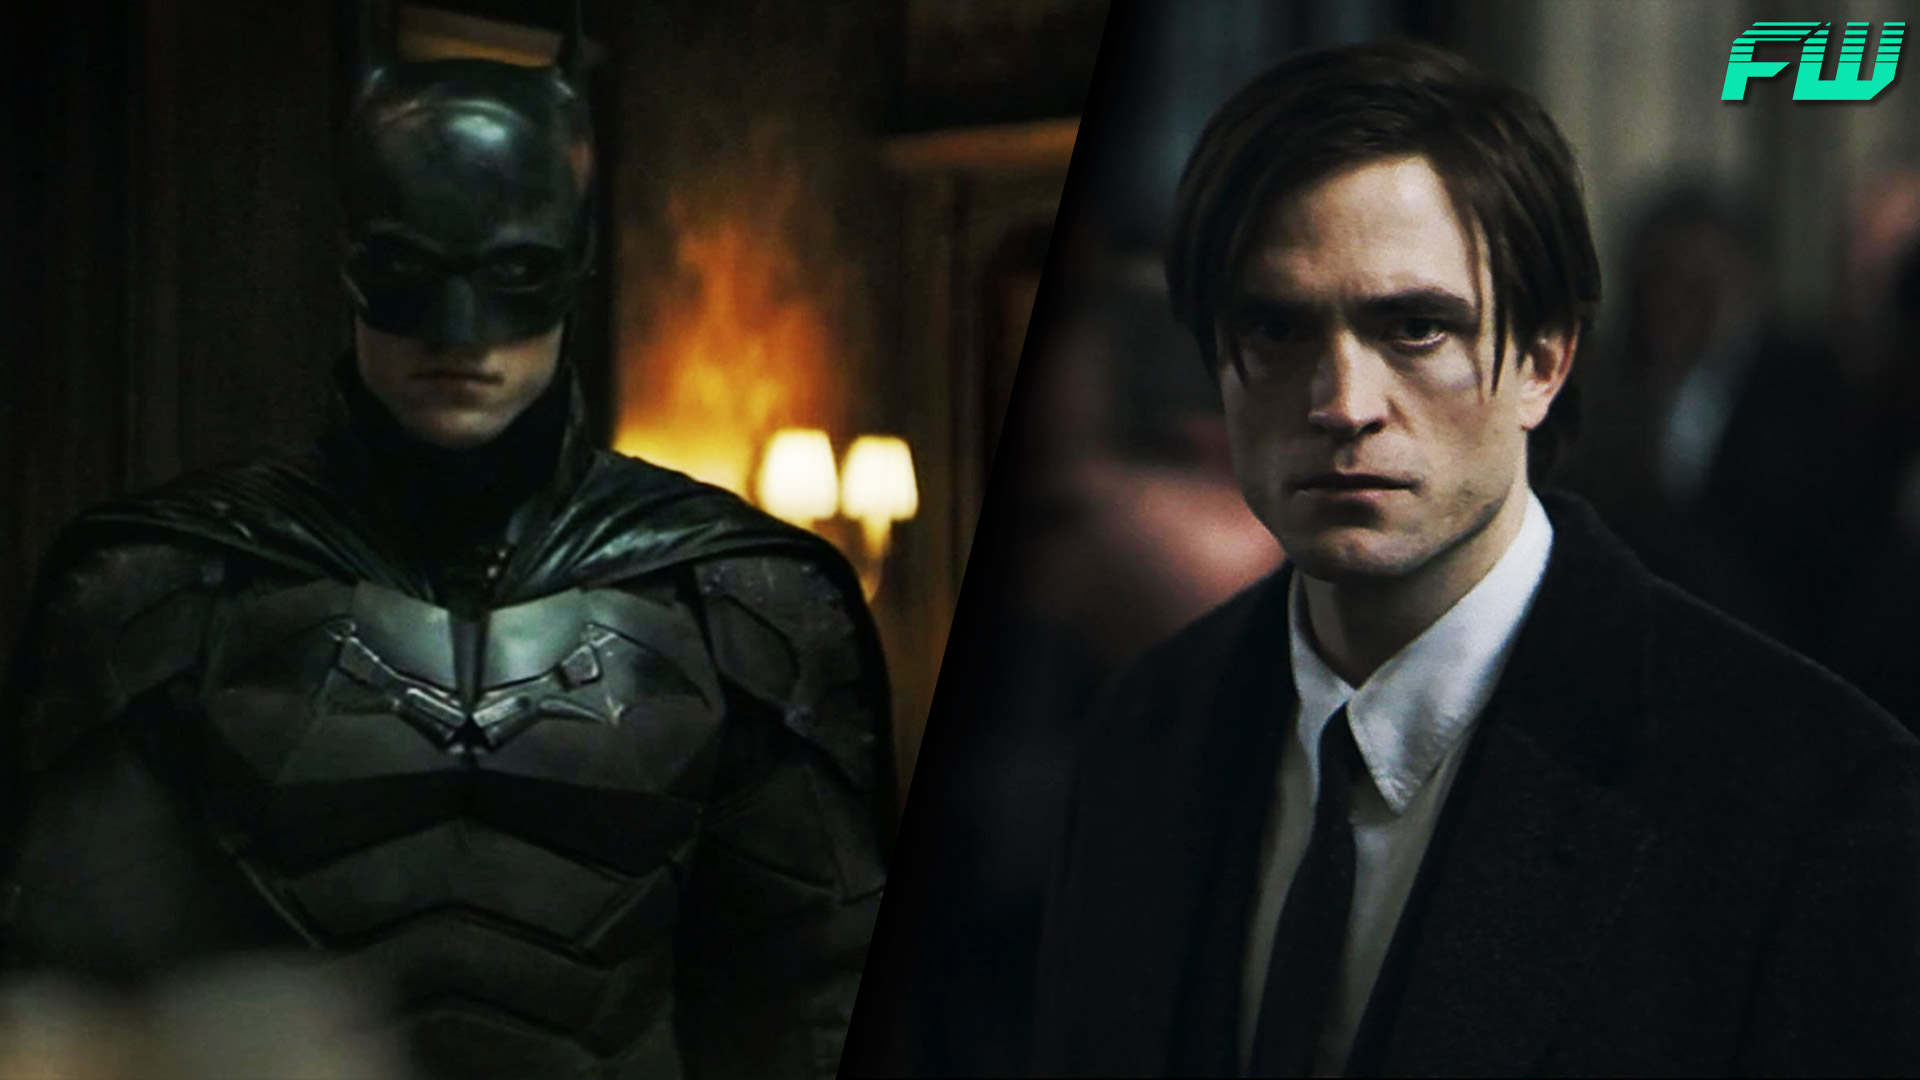 Every Major Release Coming To HBO Max After The Batman - FandomWire